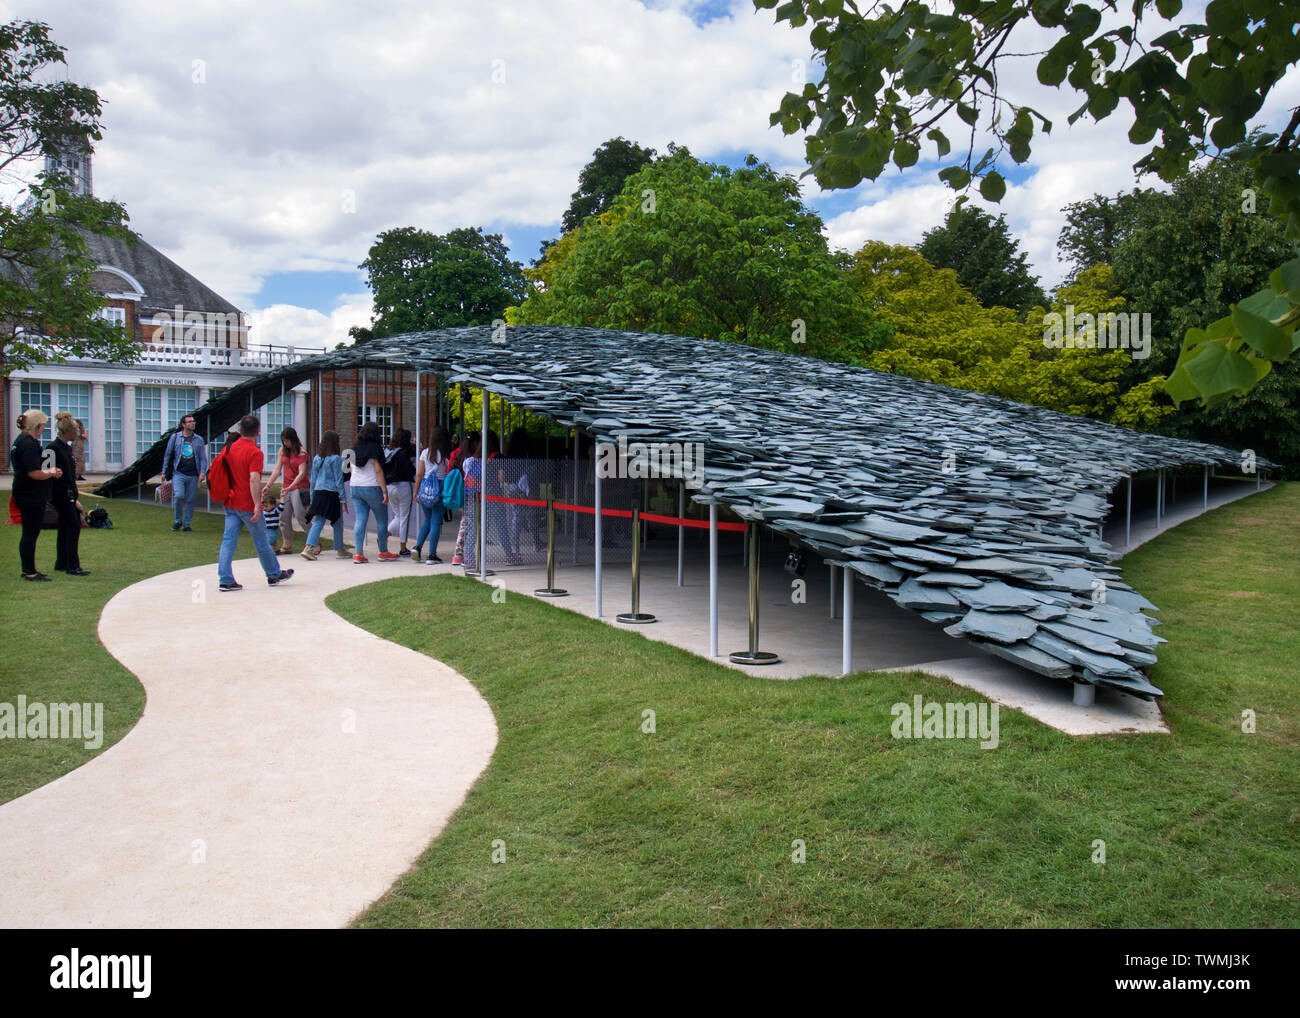 The slate roof of the 2019 Serpentine Pavilion in London's Hyde Park, designed by architect, Junya Ishigami. Stock Photo